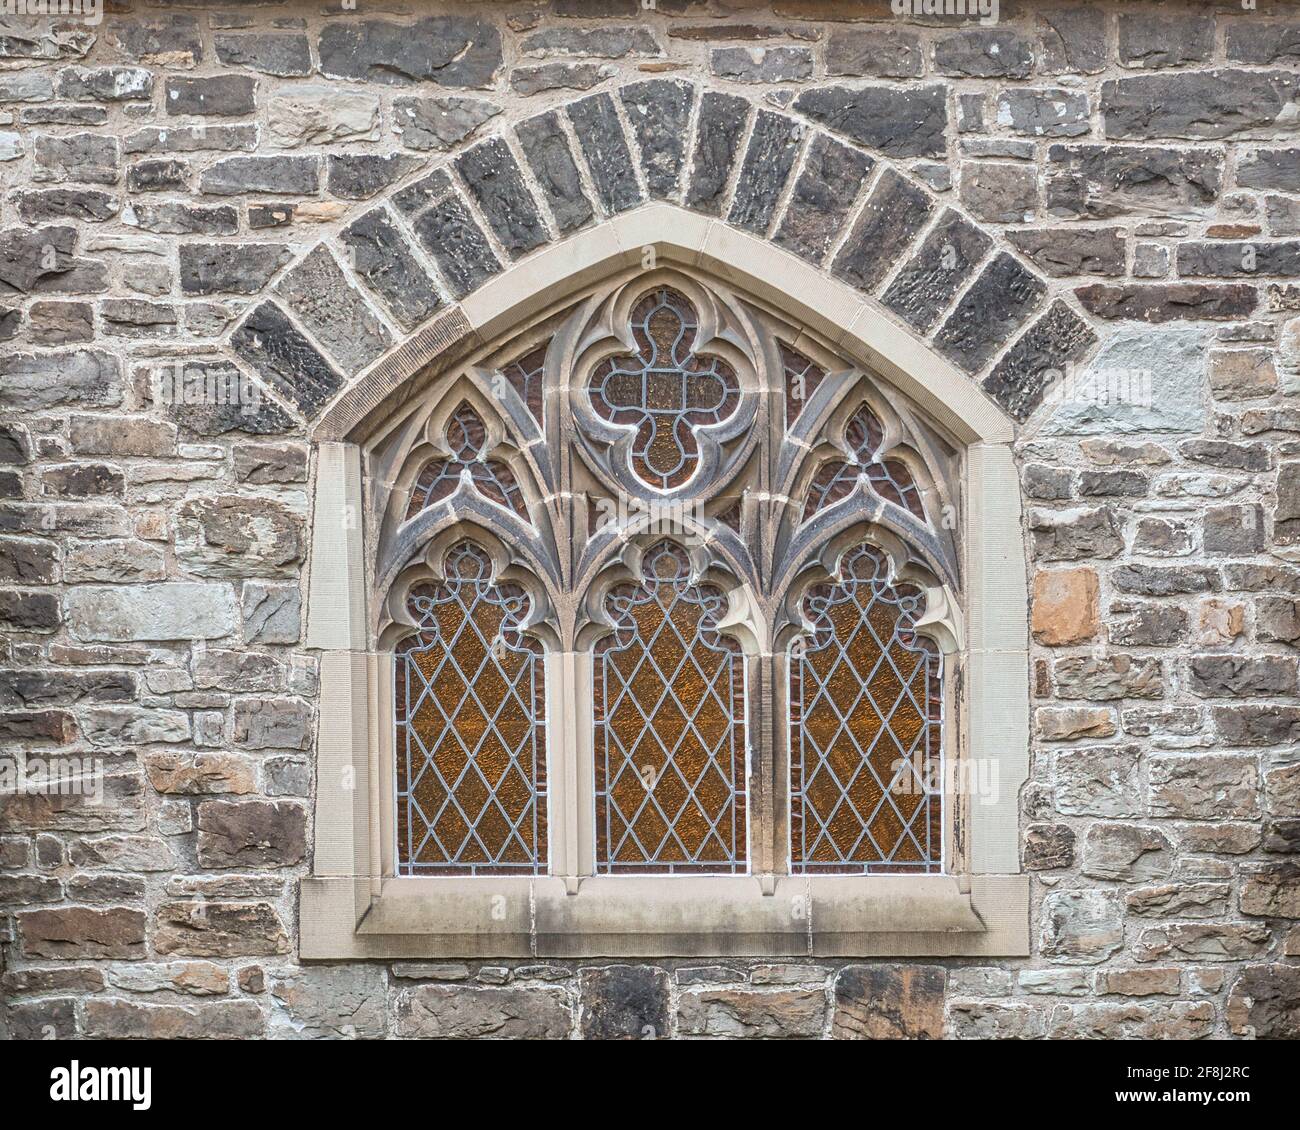 Gothic Architecture in Saint Paul's Anglican Church in Toronto, Canada Stock Photo